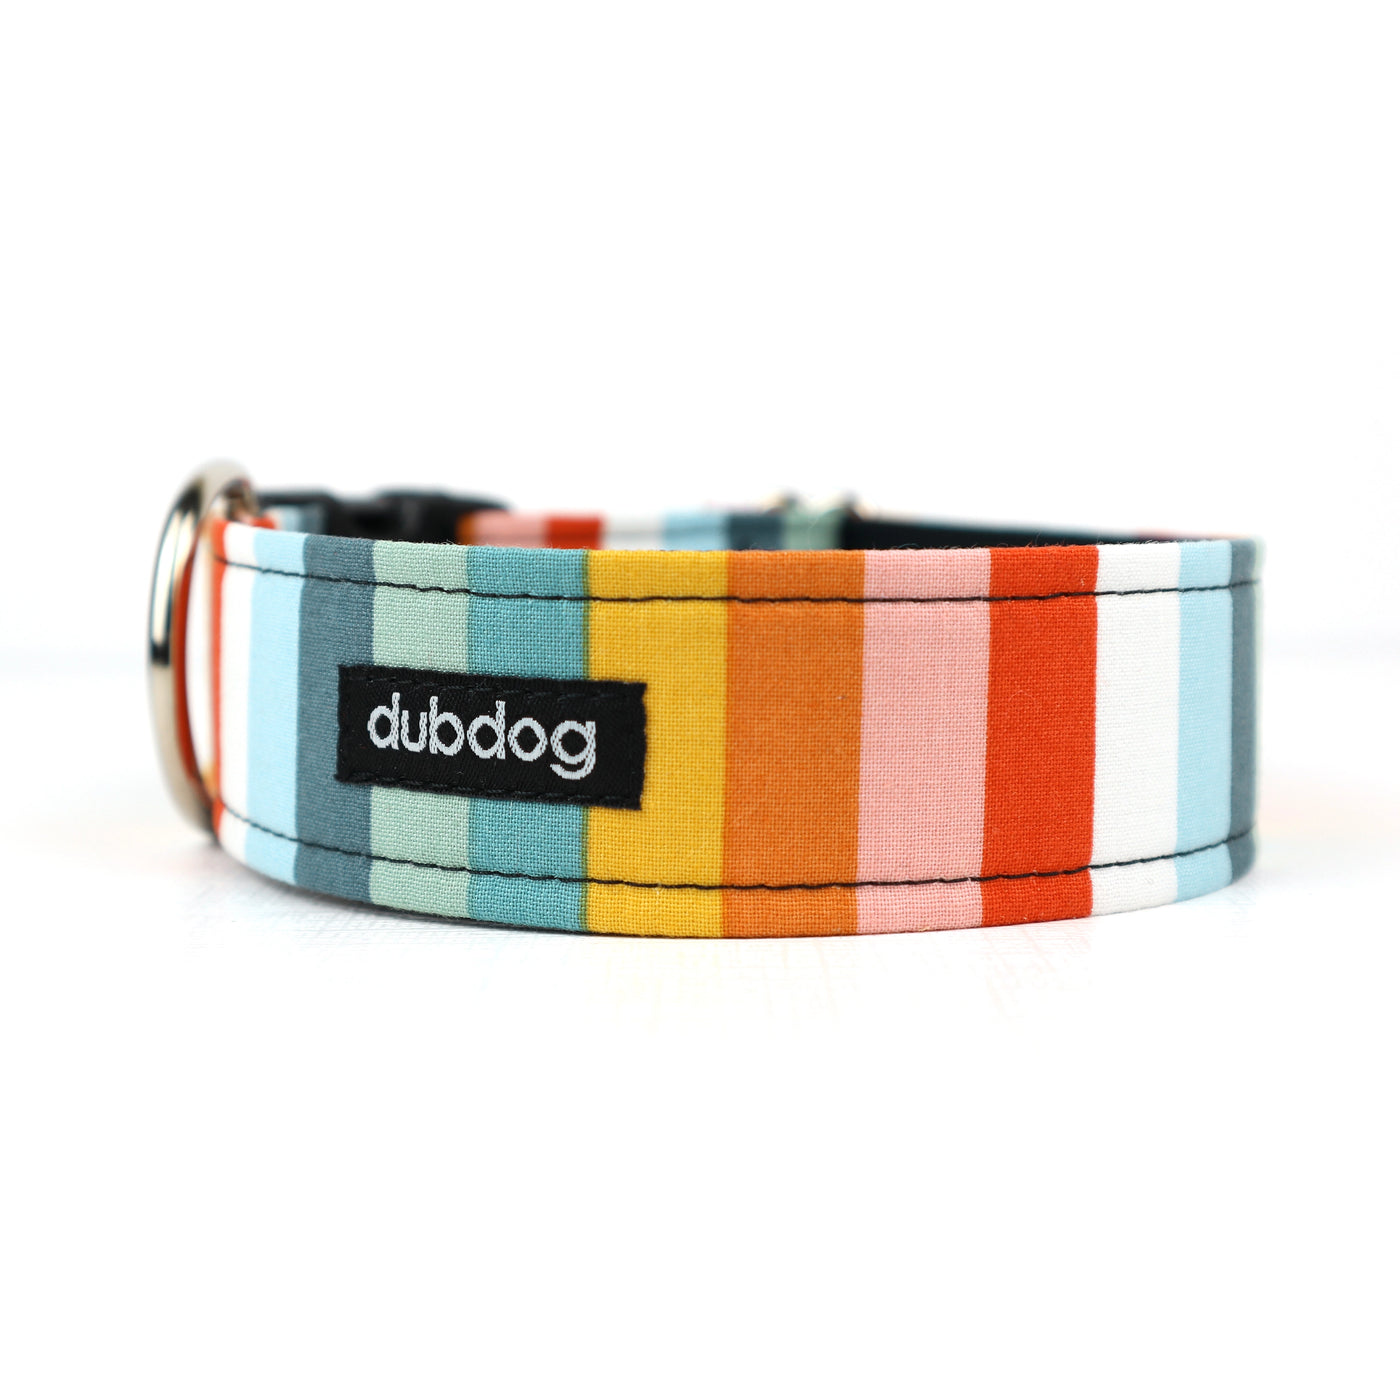 Colorful striped dog collar featuring name brand tag, "dubdog"